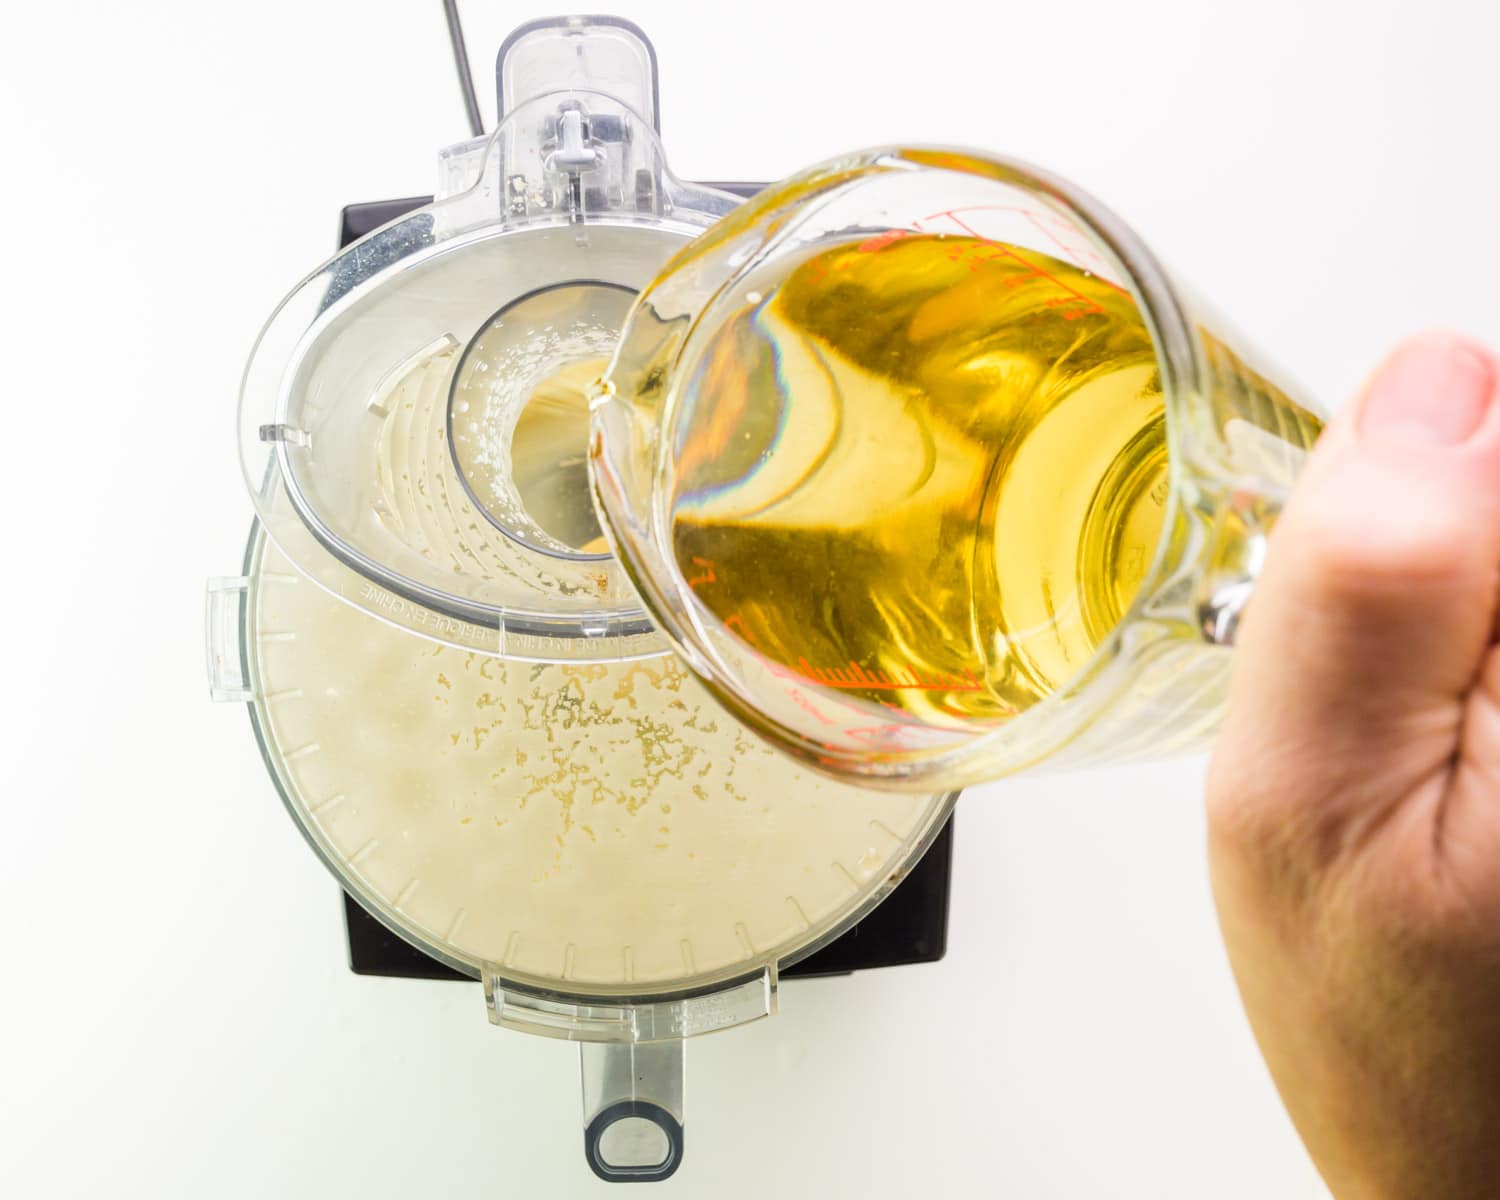 Vegetable oil is being poured into the top of a food processor as it's running.